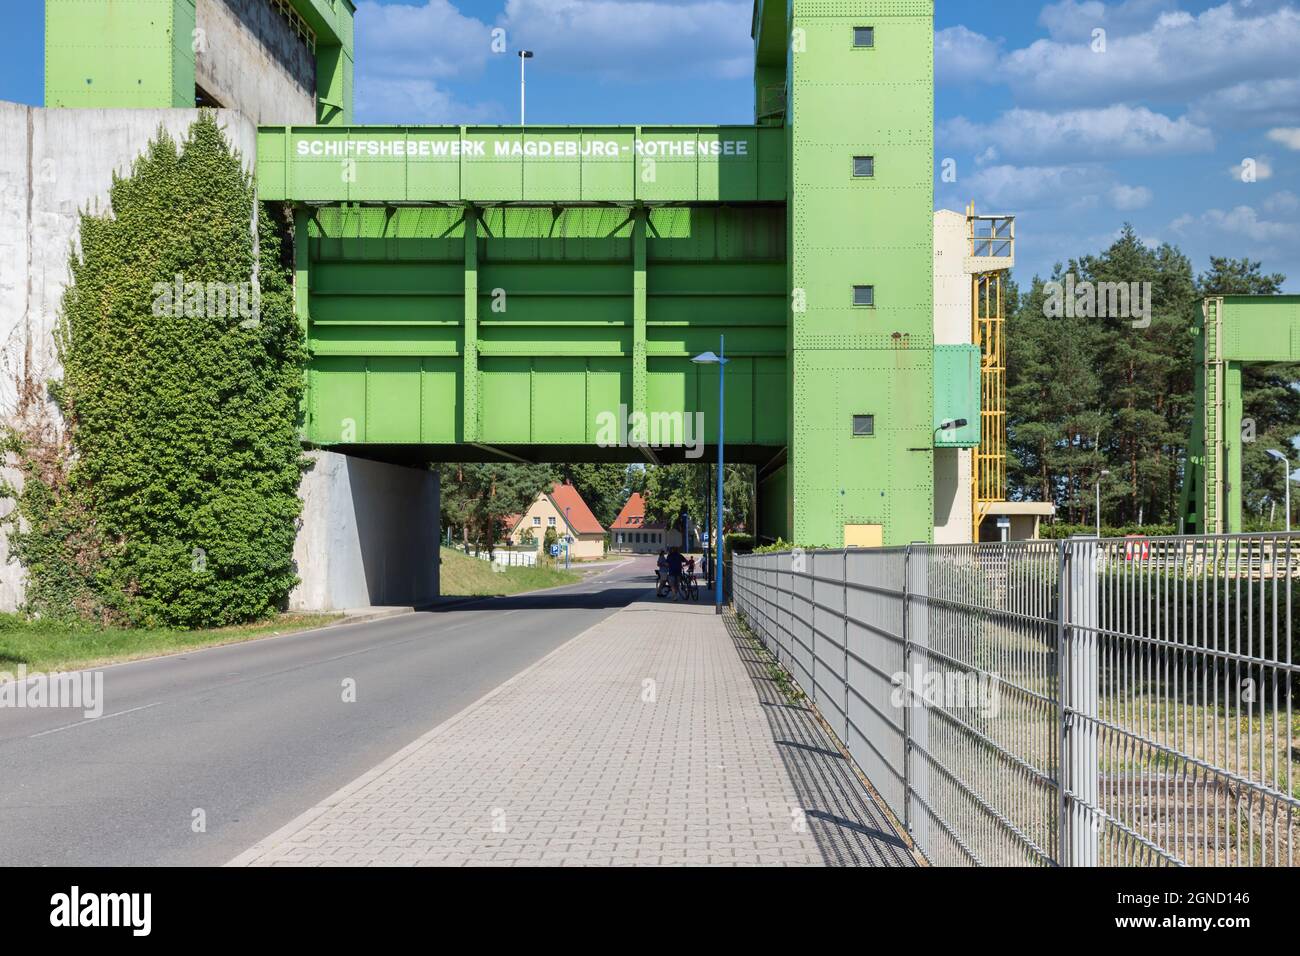 Magdeburg, Germany - Juli 20, 2013: Iron constructions of boatlift near German magdeburg wtith footpath and bannister Stock Photo